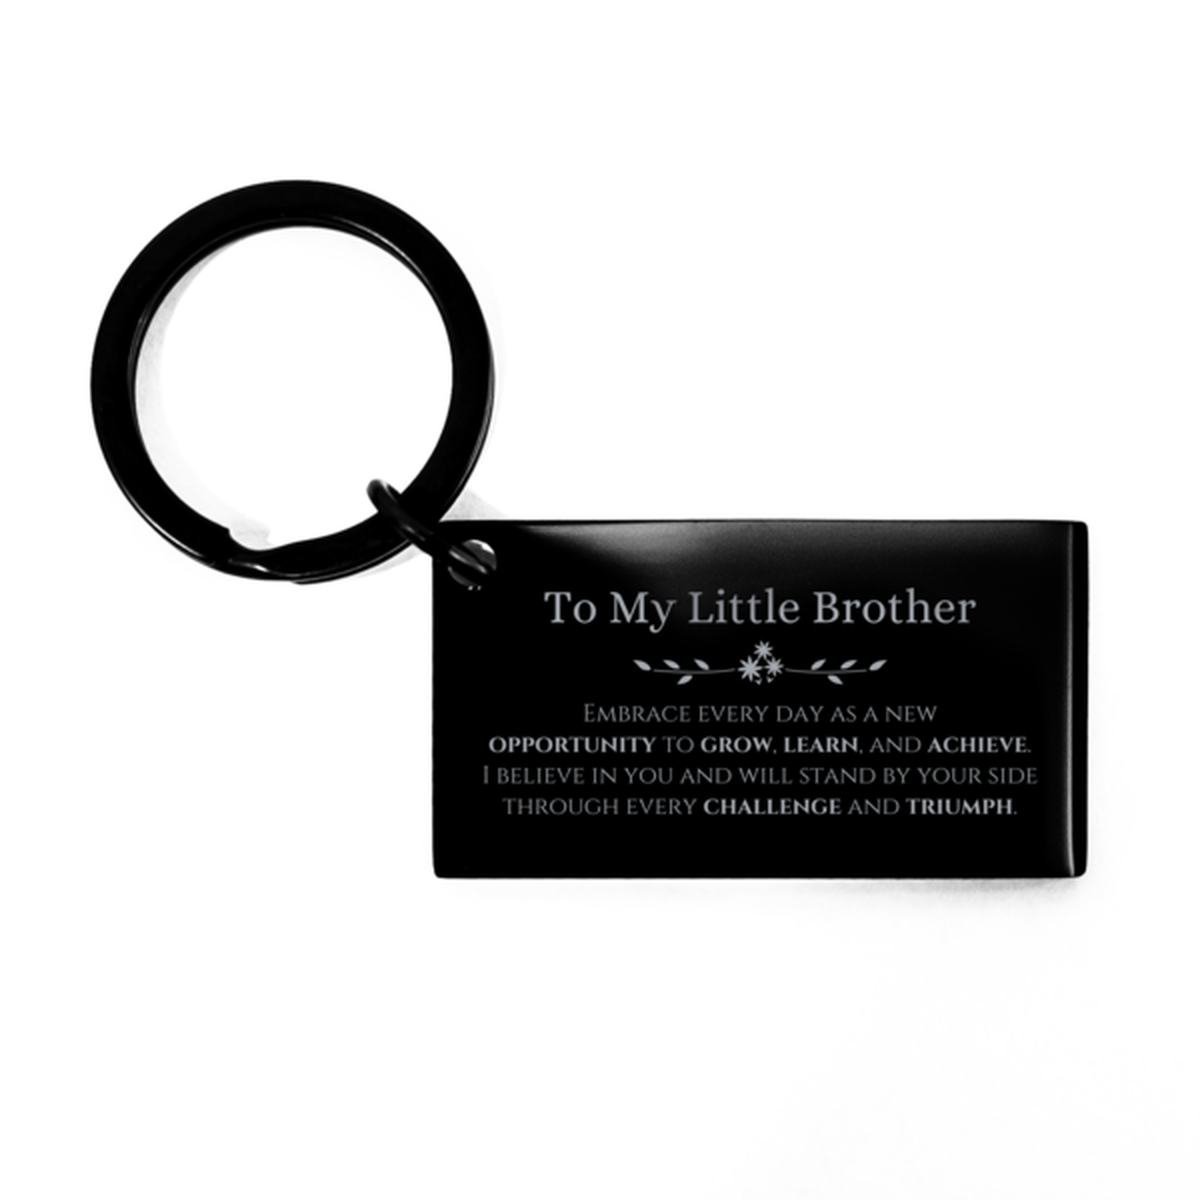 To My Little Brother Gifts, I believe in you and will stand by your side, Inspirational Keychain For Little Brother, Birthday Christmas Motivational Little Brother Gifts